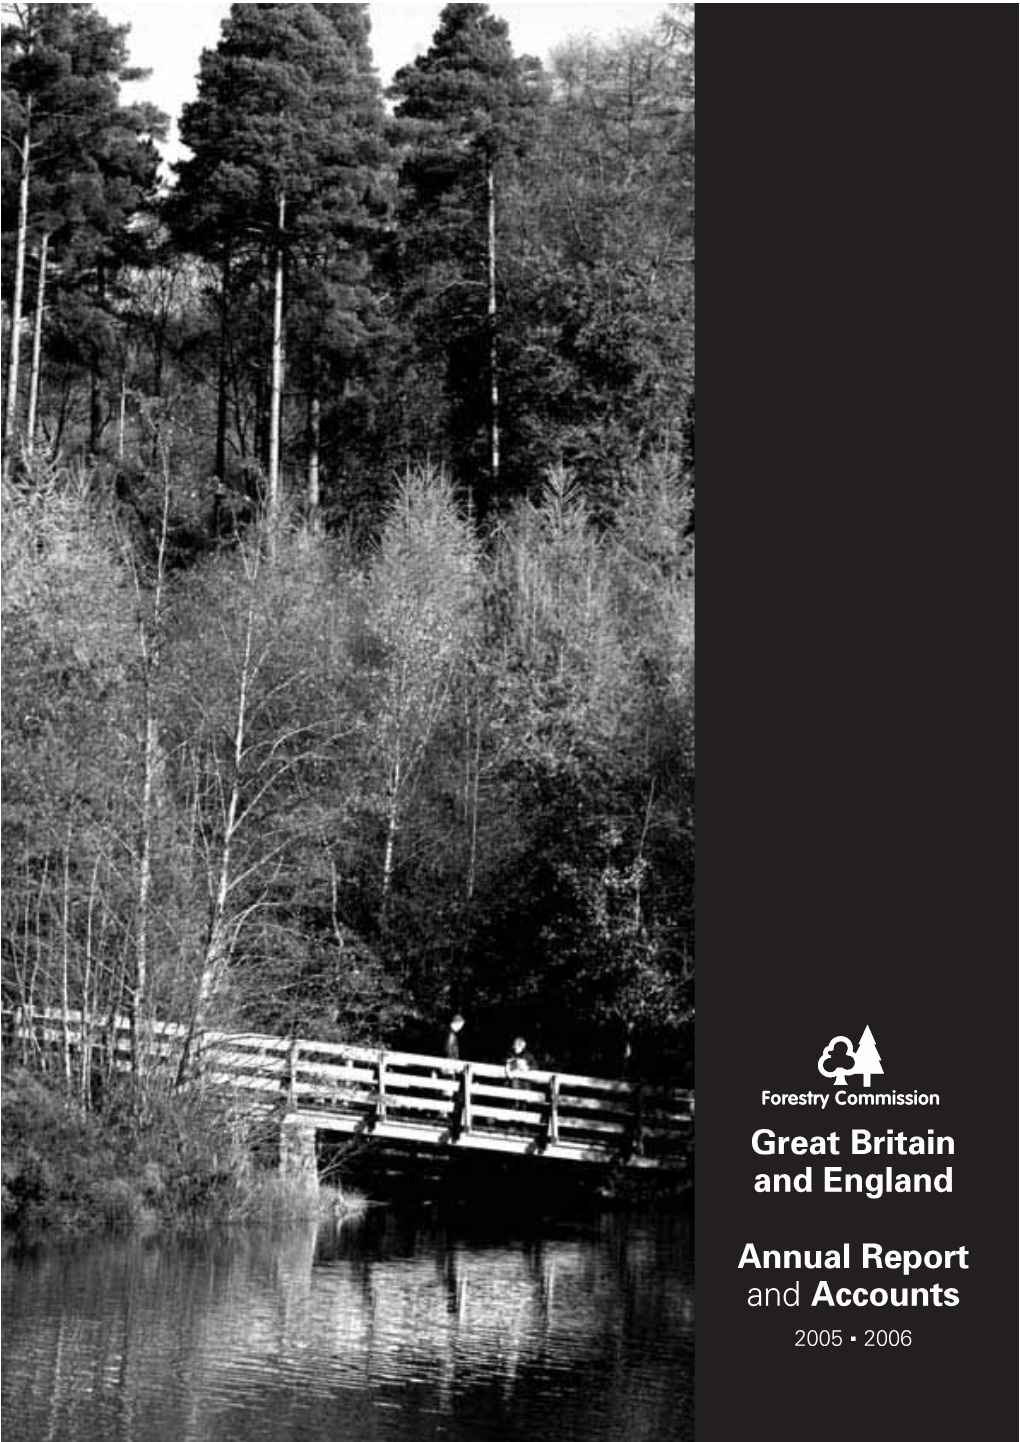 FORESTRY COMMISSION Annual Report and Accounts 2005-06 for Great Britain and England Together with the Comptroller and Auditor General’S Report on the Accounts